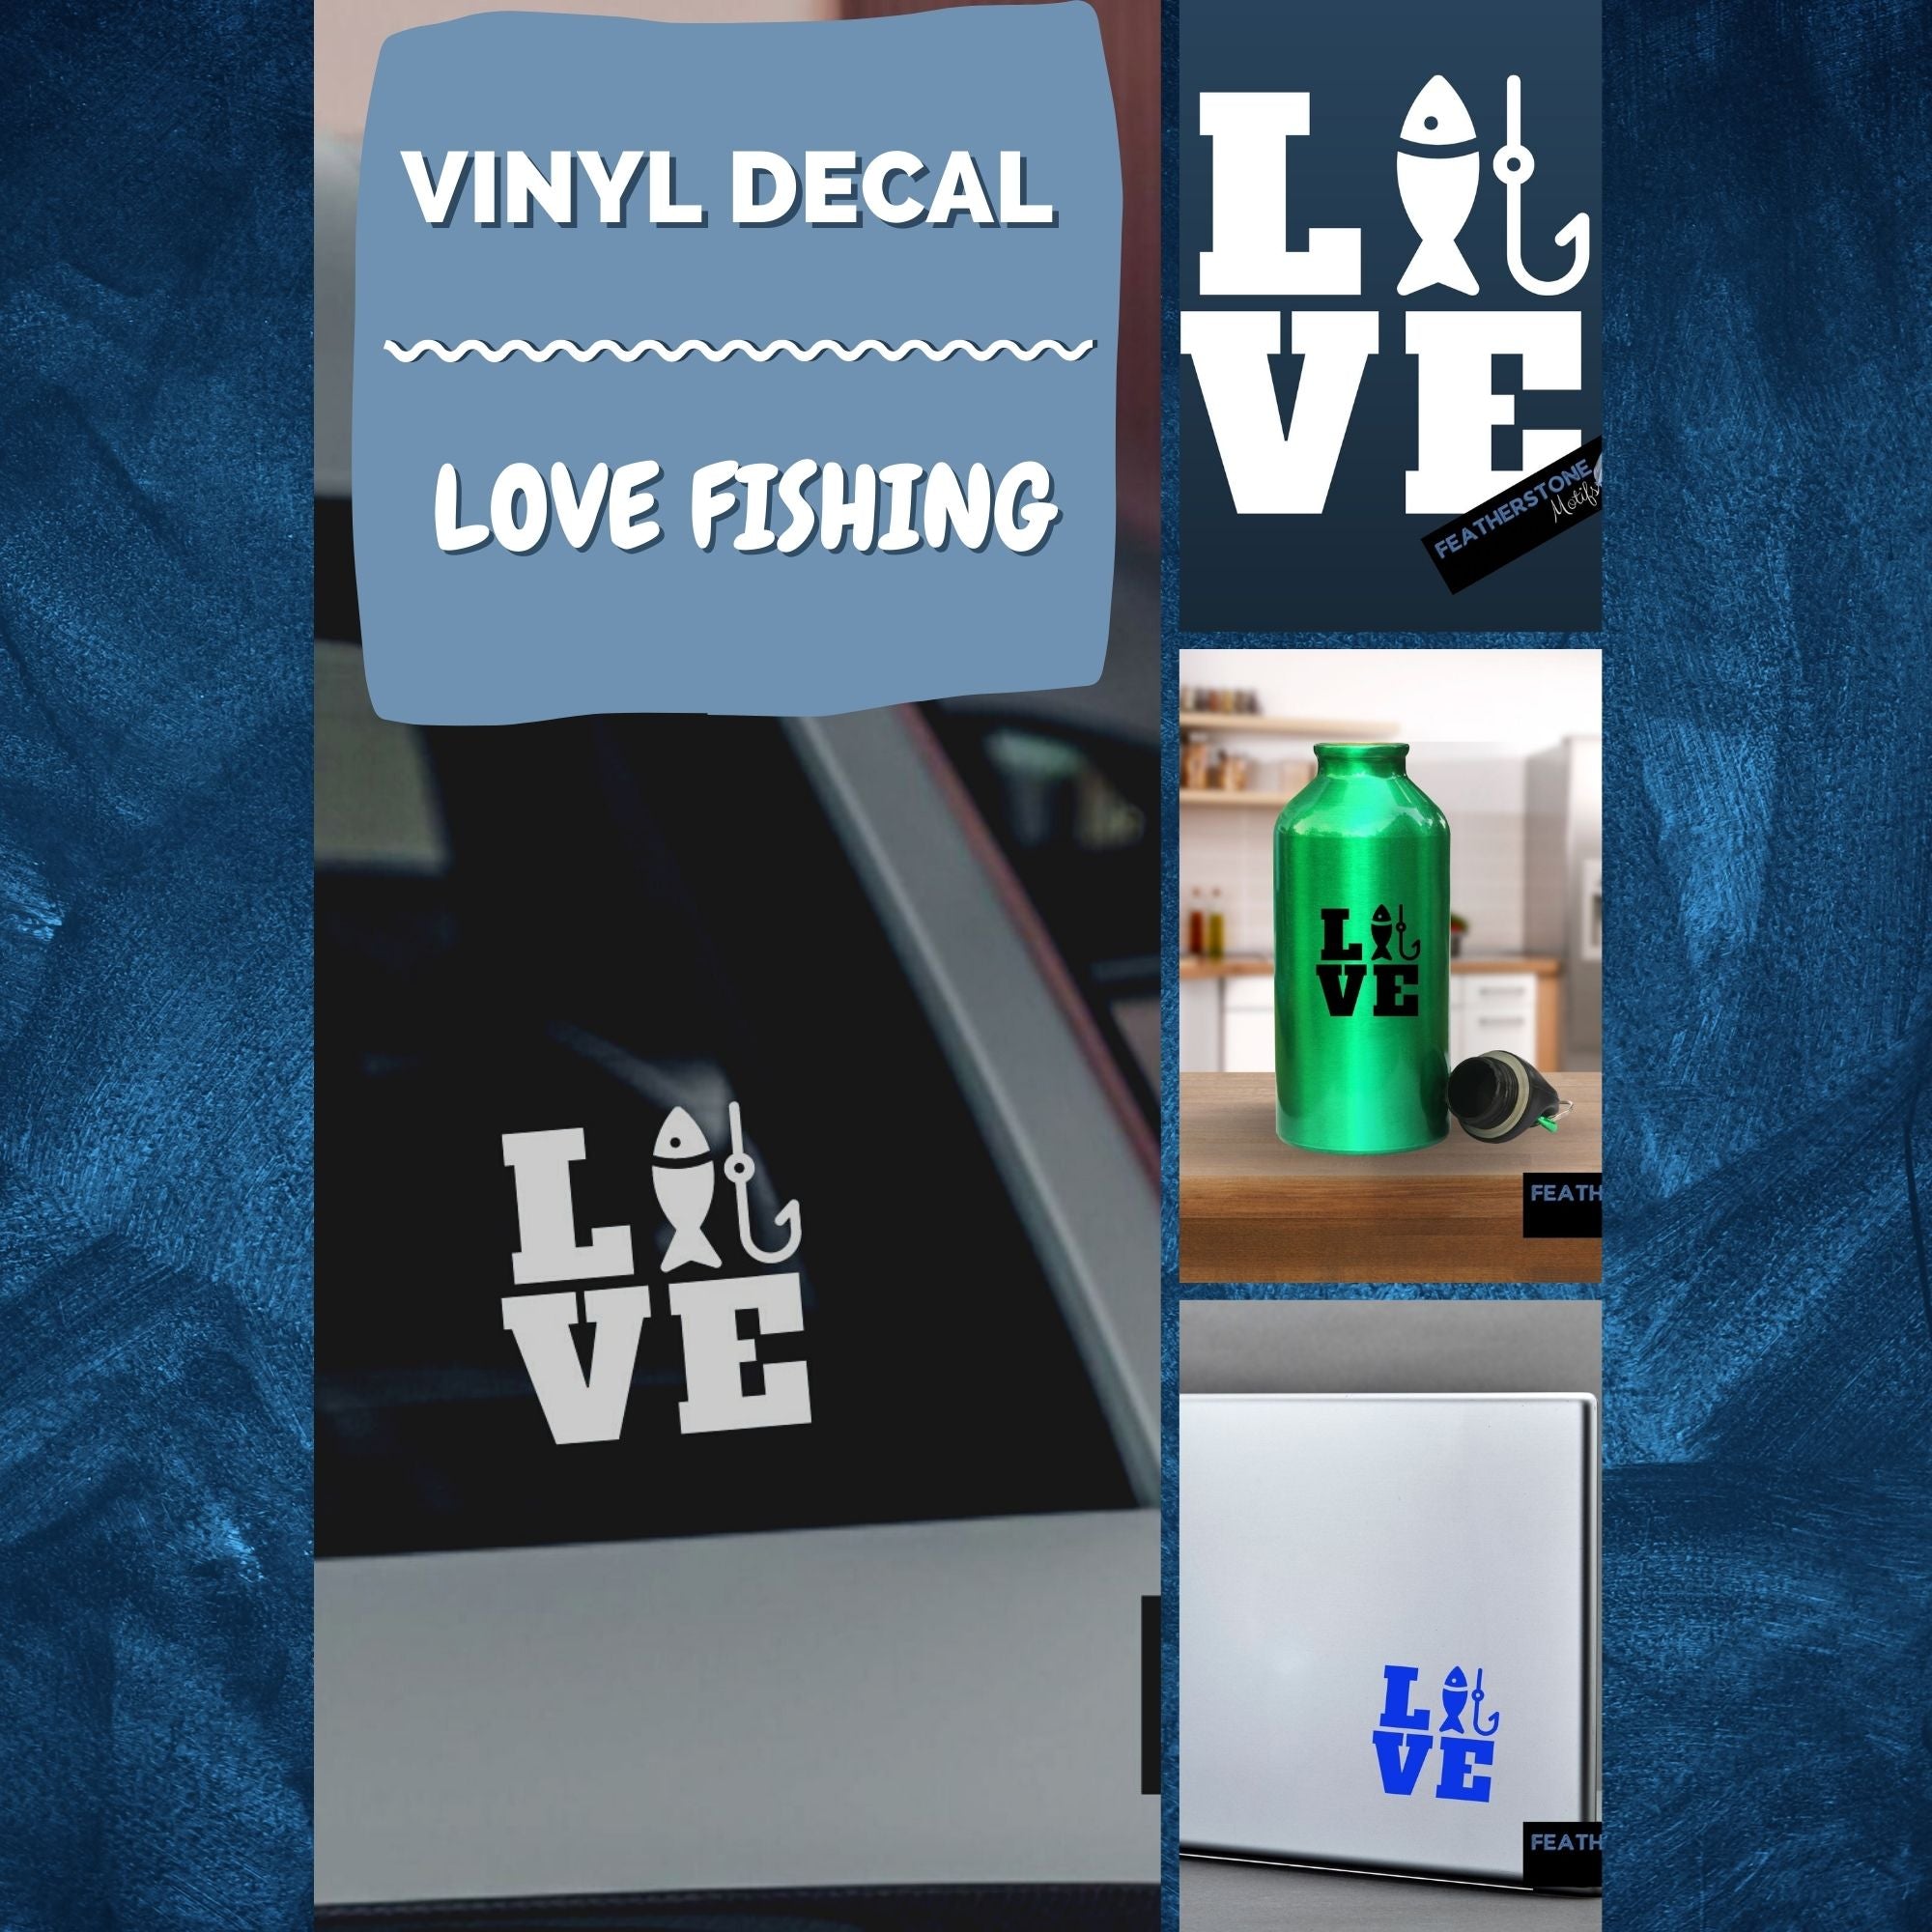 Love the fishing? Then show it with this fishing love square vinyl decal! Available in 4 sizes and 10 colors, these vinyl decals make great gifts for everyone. This image shows the cover page.